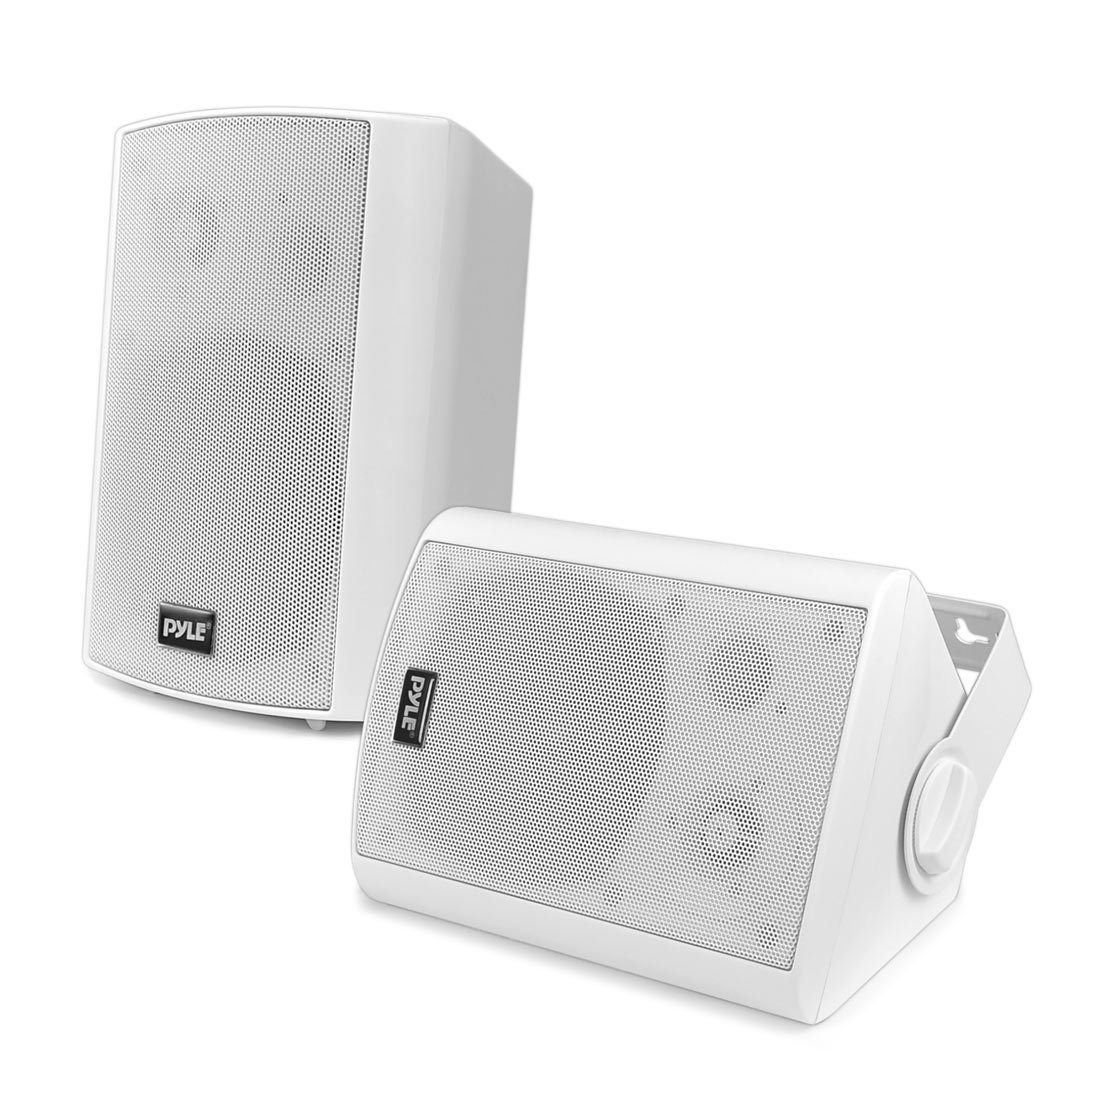 Pyle Wall Mount Home Speaker System - Active + Passive Pair Wireless Bluetooth Compatible Indoor / Outdoor Water-resistant Weatherproof Stereo Sound Speaker Set with AUX IN - Pyle PDWR51BTWT (White)